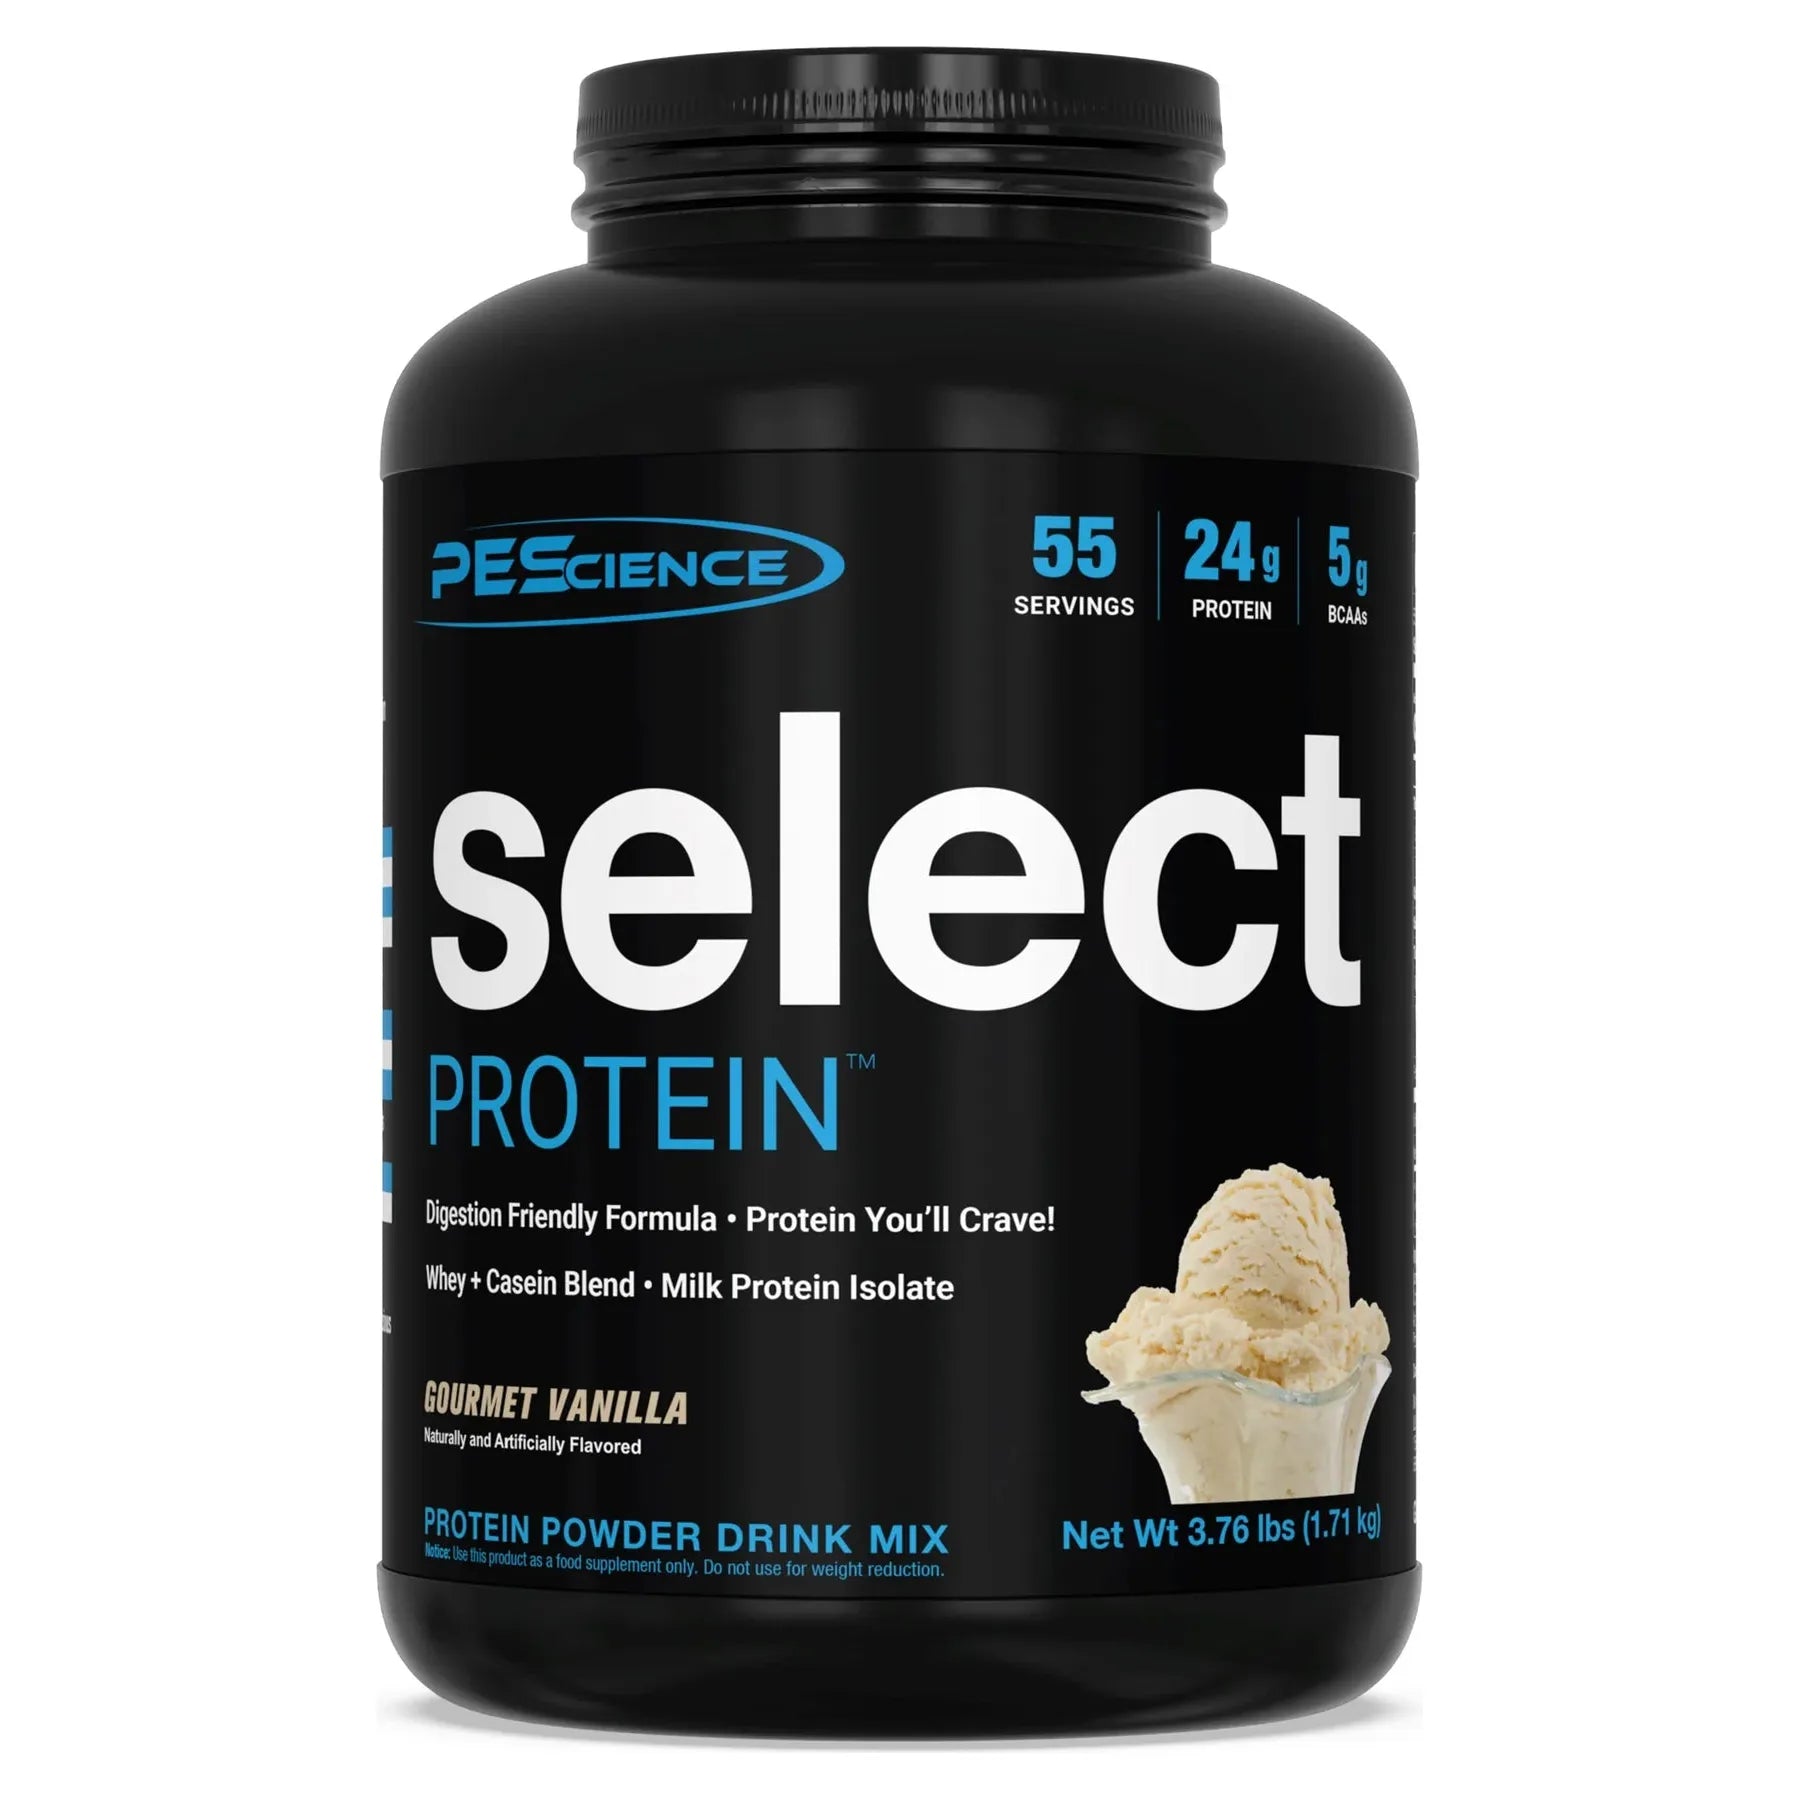 PEScience Select Protein (55 servings)  Top Nutrition and Fitness  PEScience Canada.